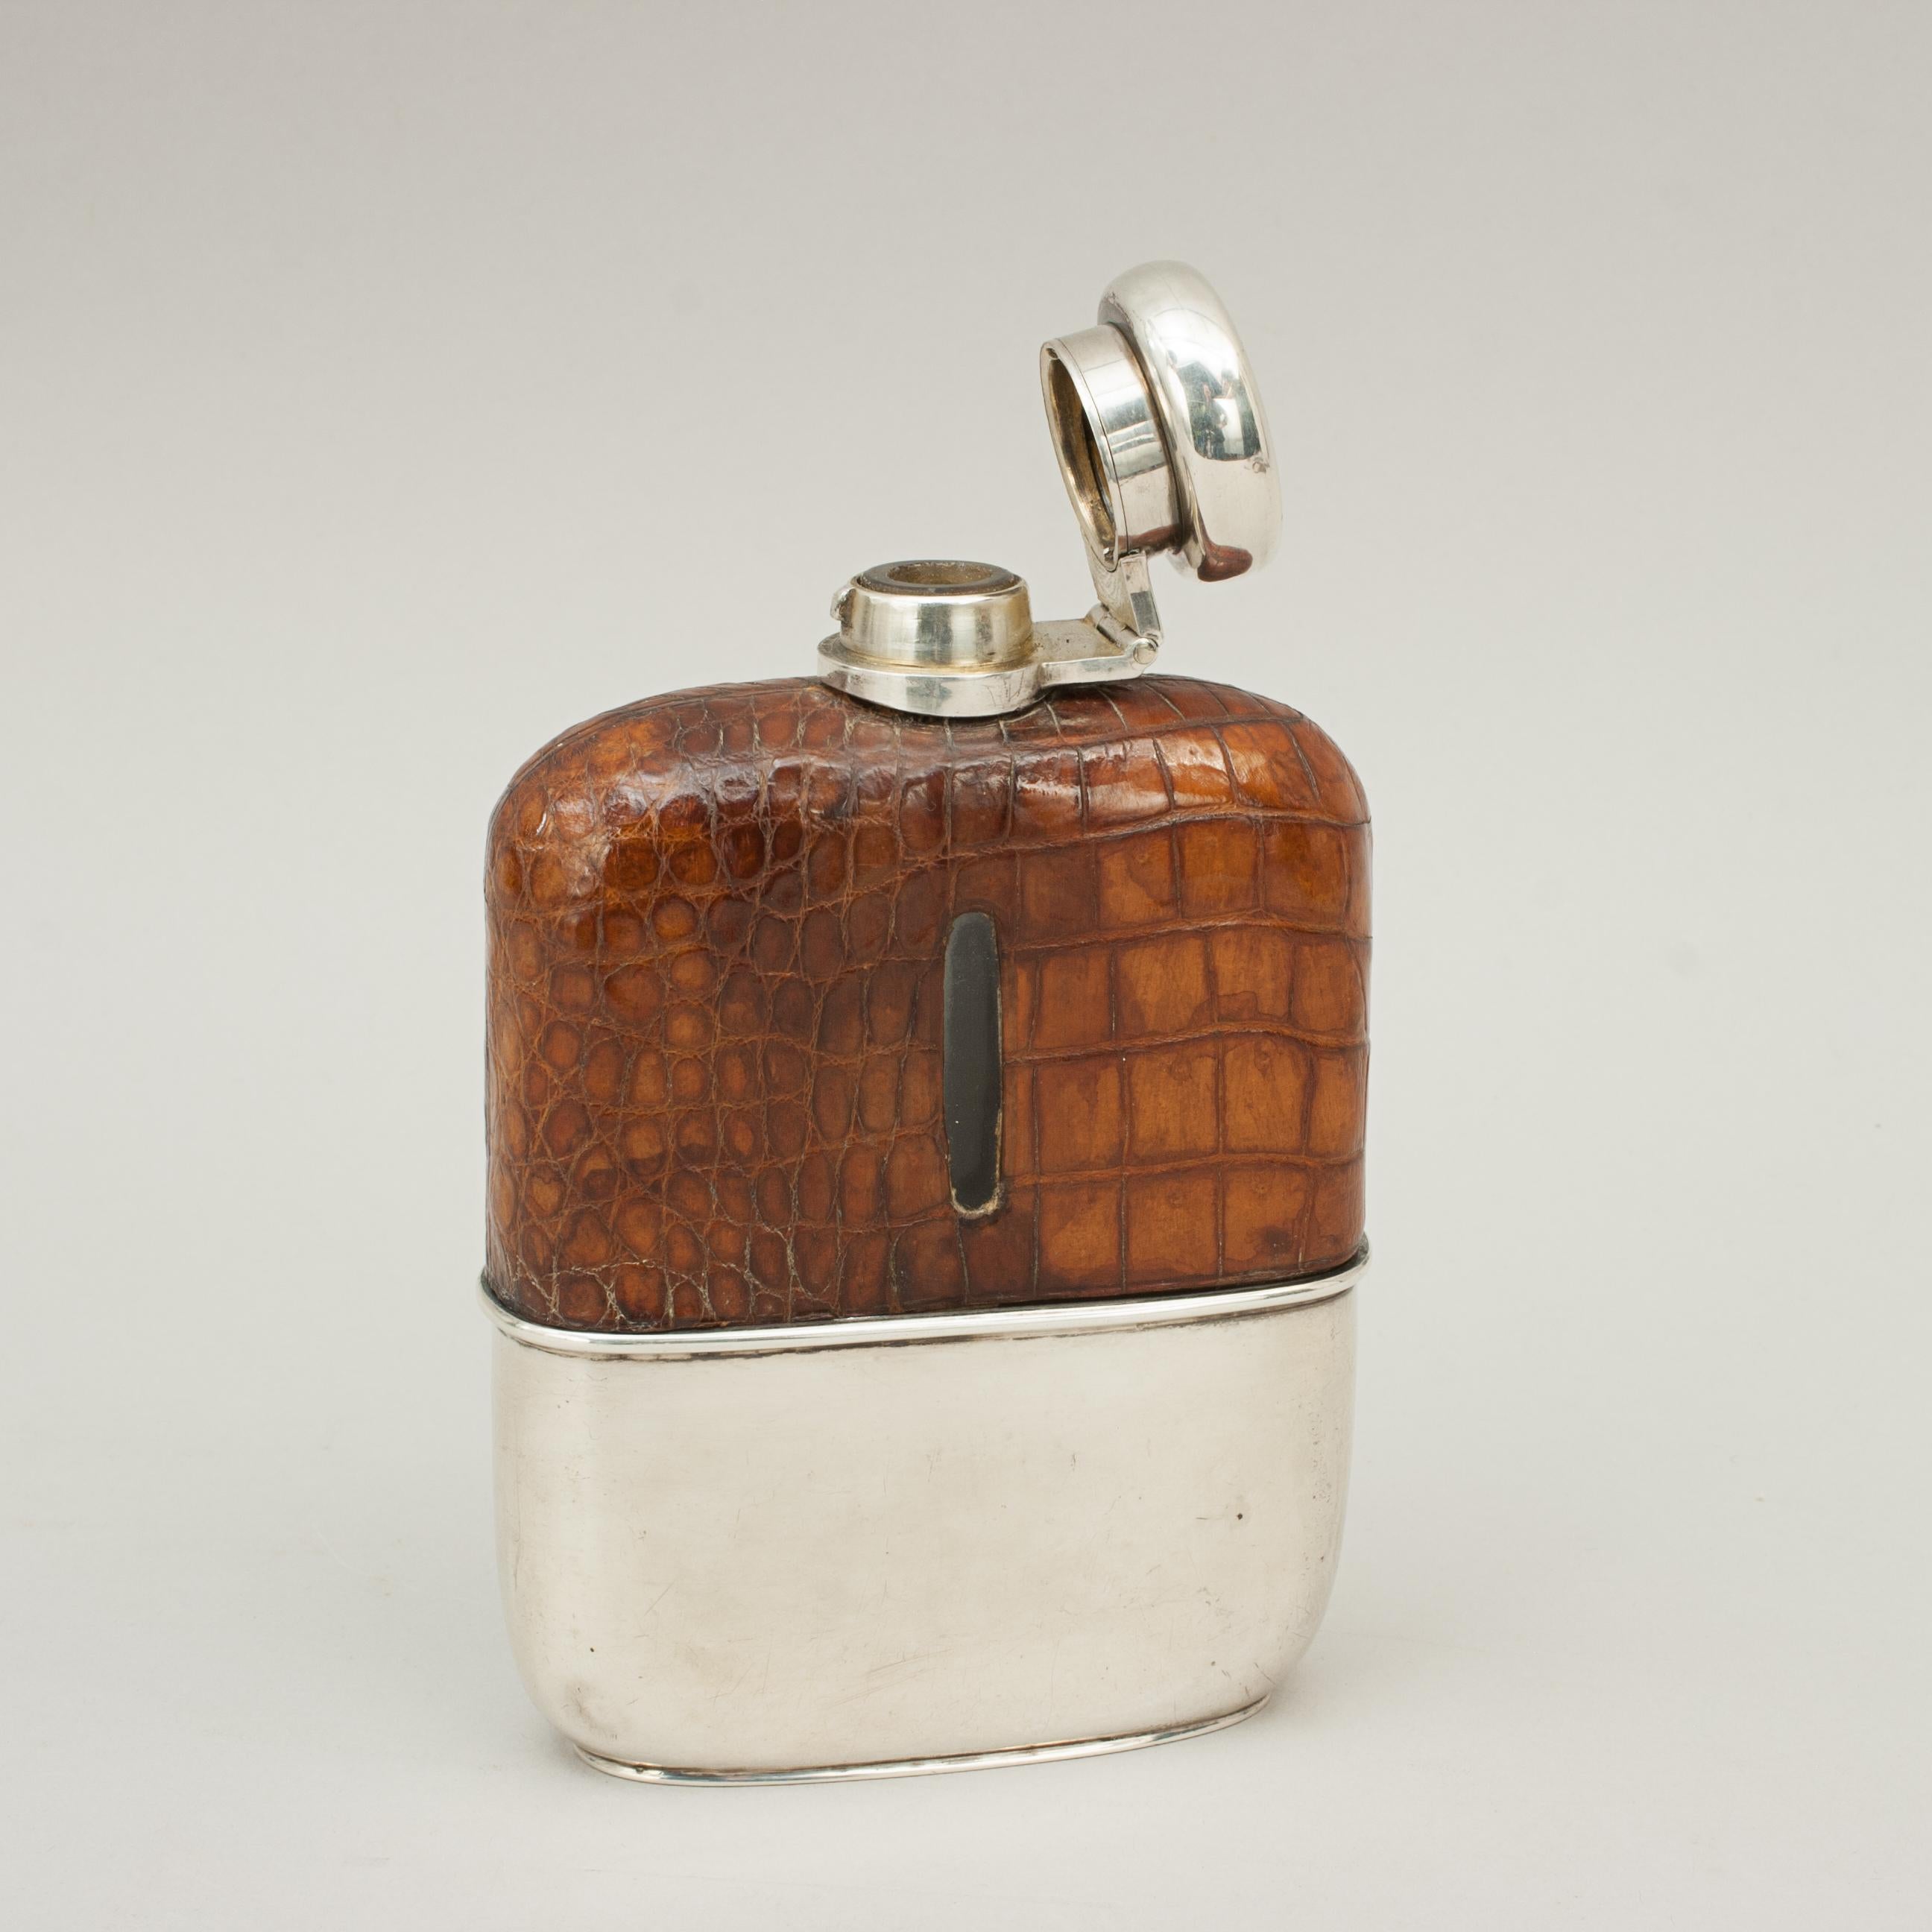 Leather and silver gentleman's hip flask.
A very nice silver spirit hip flask with the top half covered in leather with level viewing windows cut into both sides. The leather is embossed to look like crocodile skin, the flask with hinged silver lid